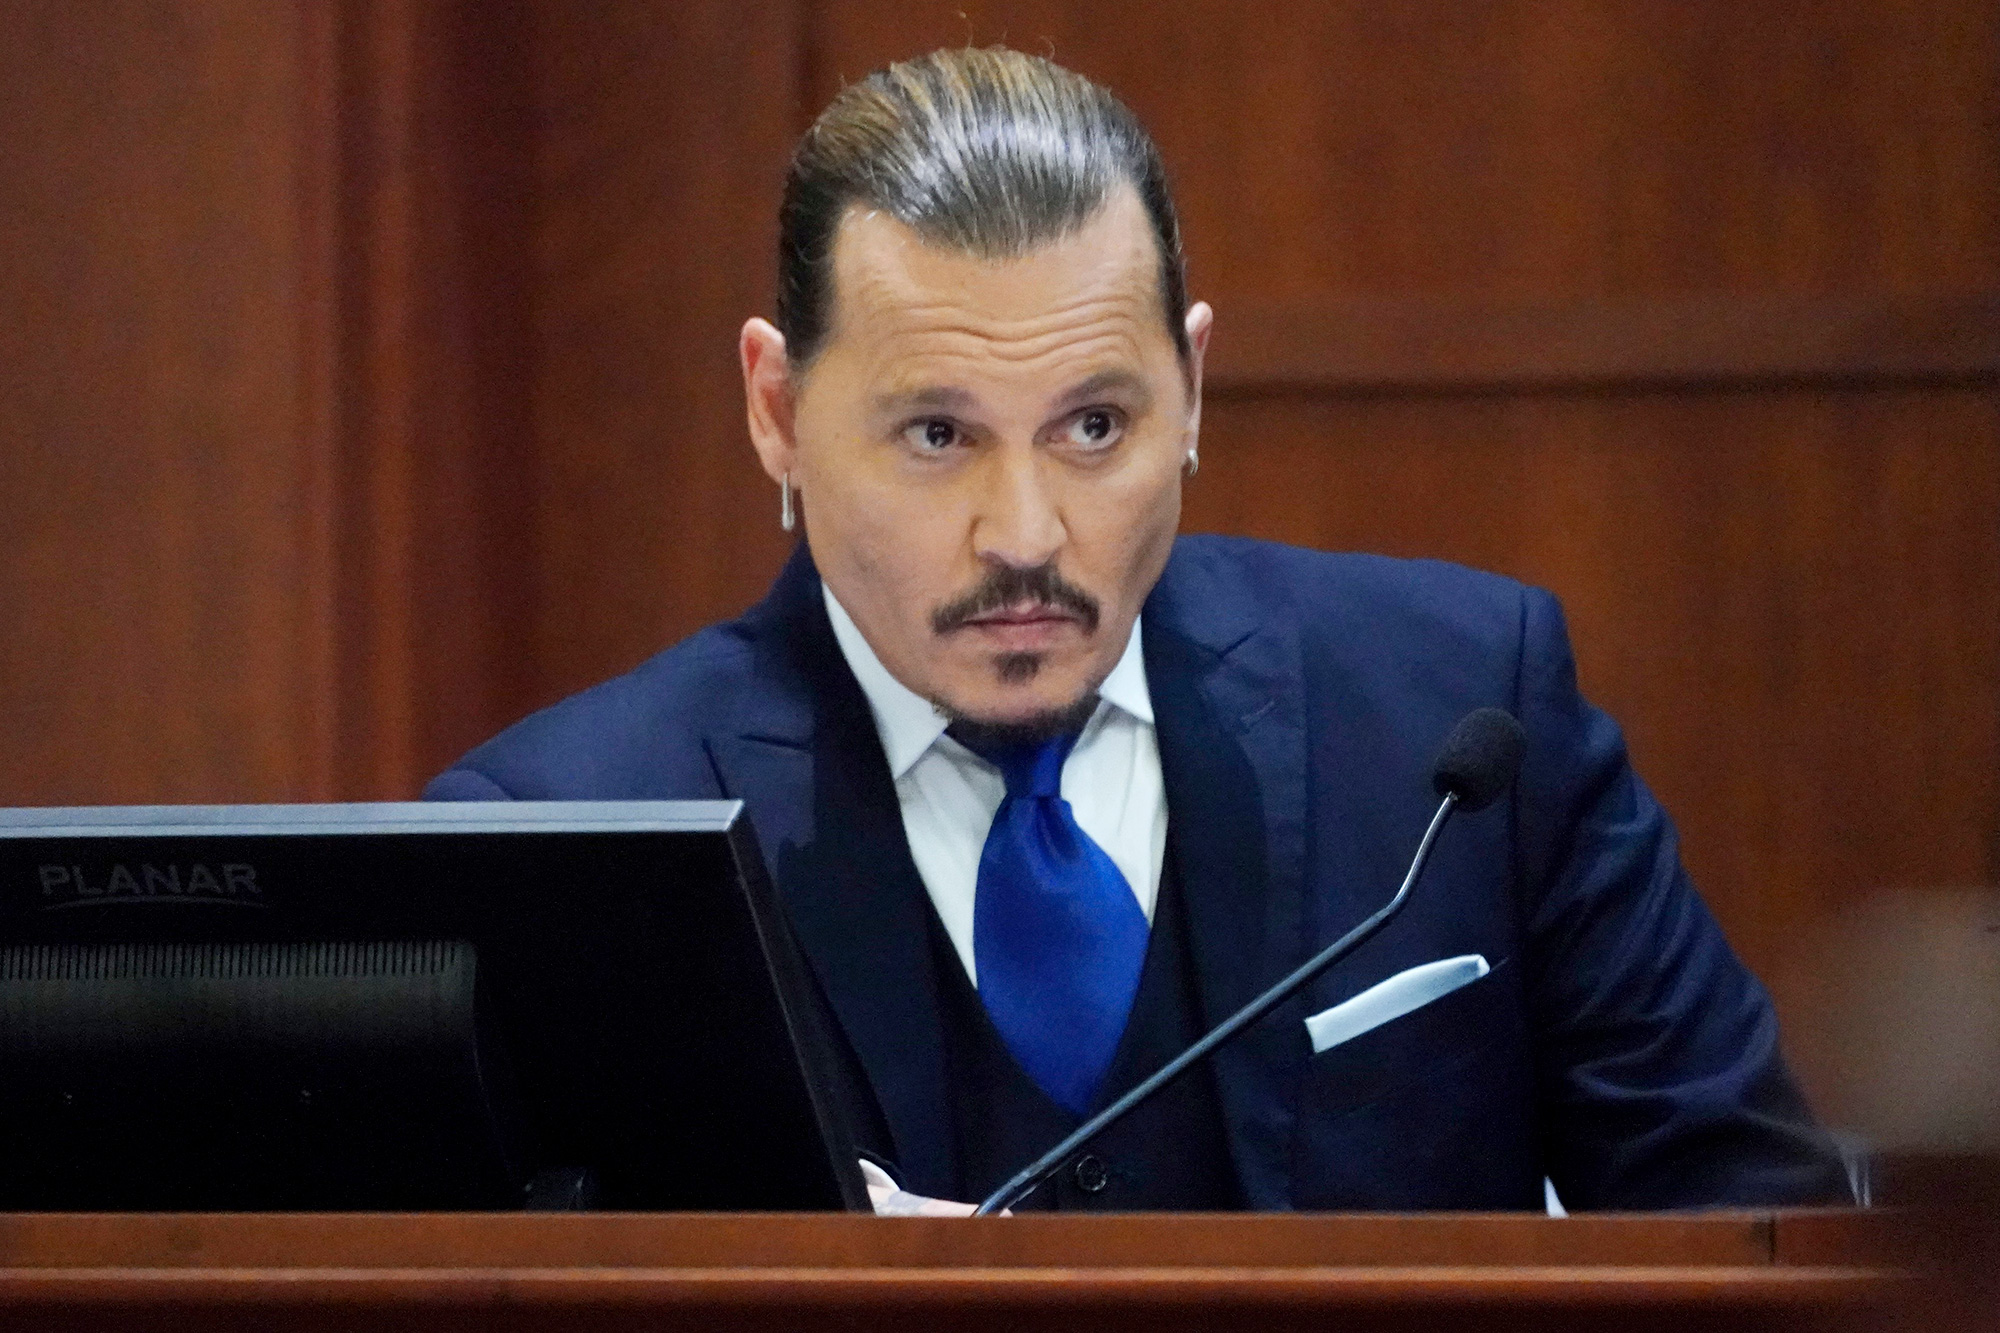 Johnny Depp may not be called on the witness stand again